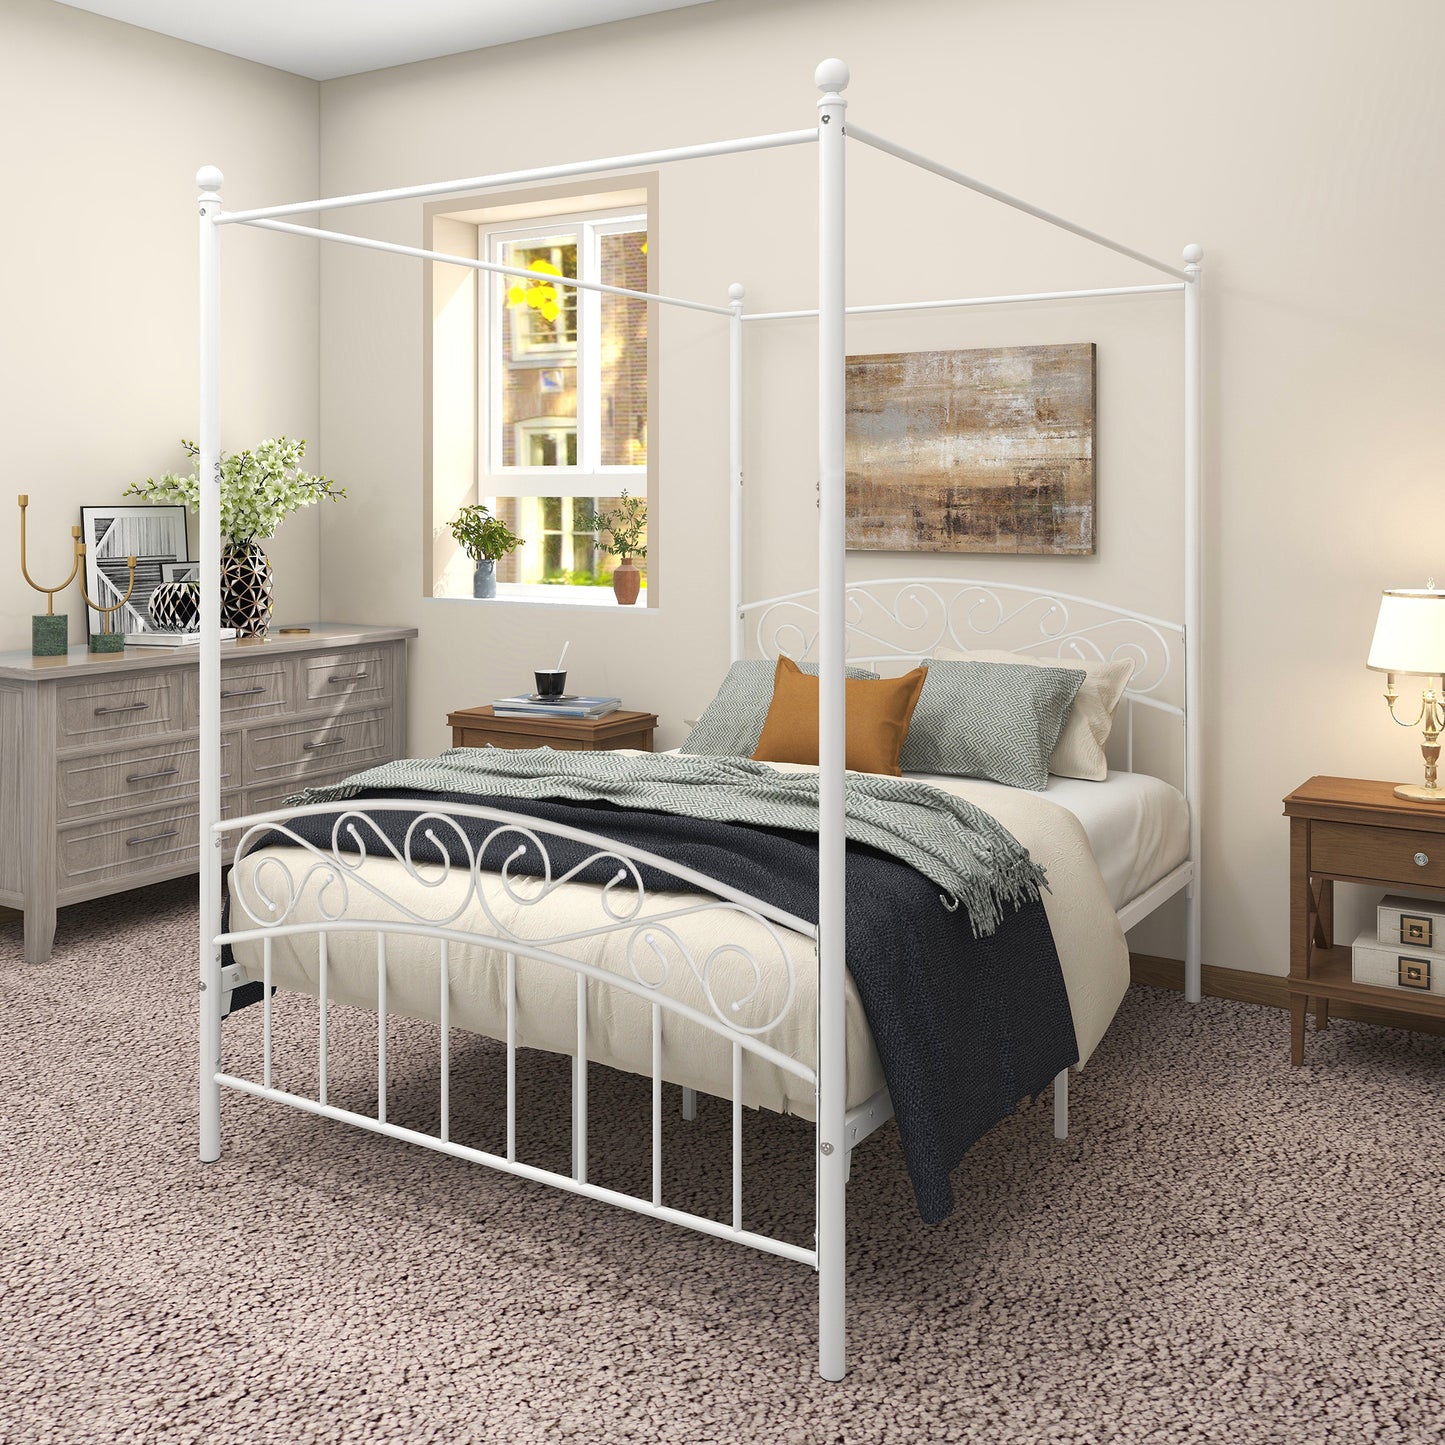 Full Size Metal Canopy Bed Frame with Ornate European Style Headboard & Footboard Sturdy Steel H/Under-Bed Storage Space/No Box Spring Needed/White